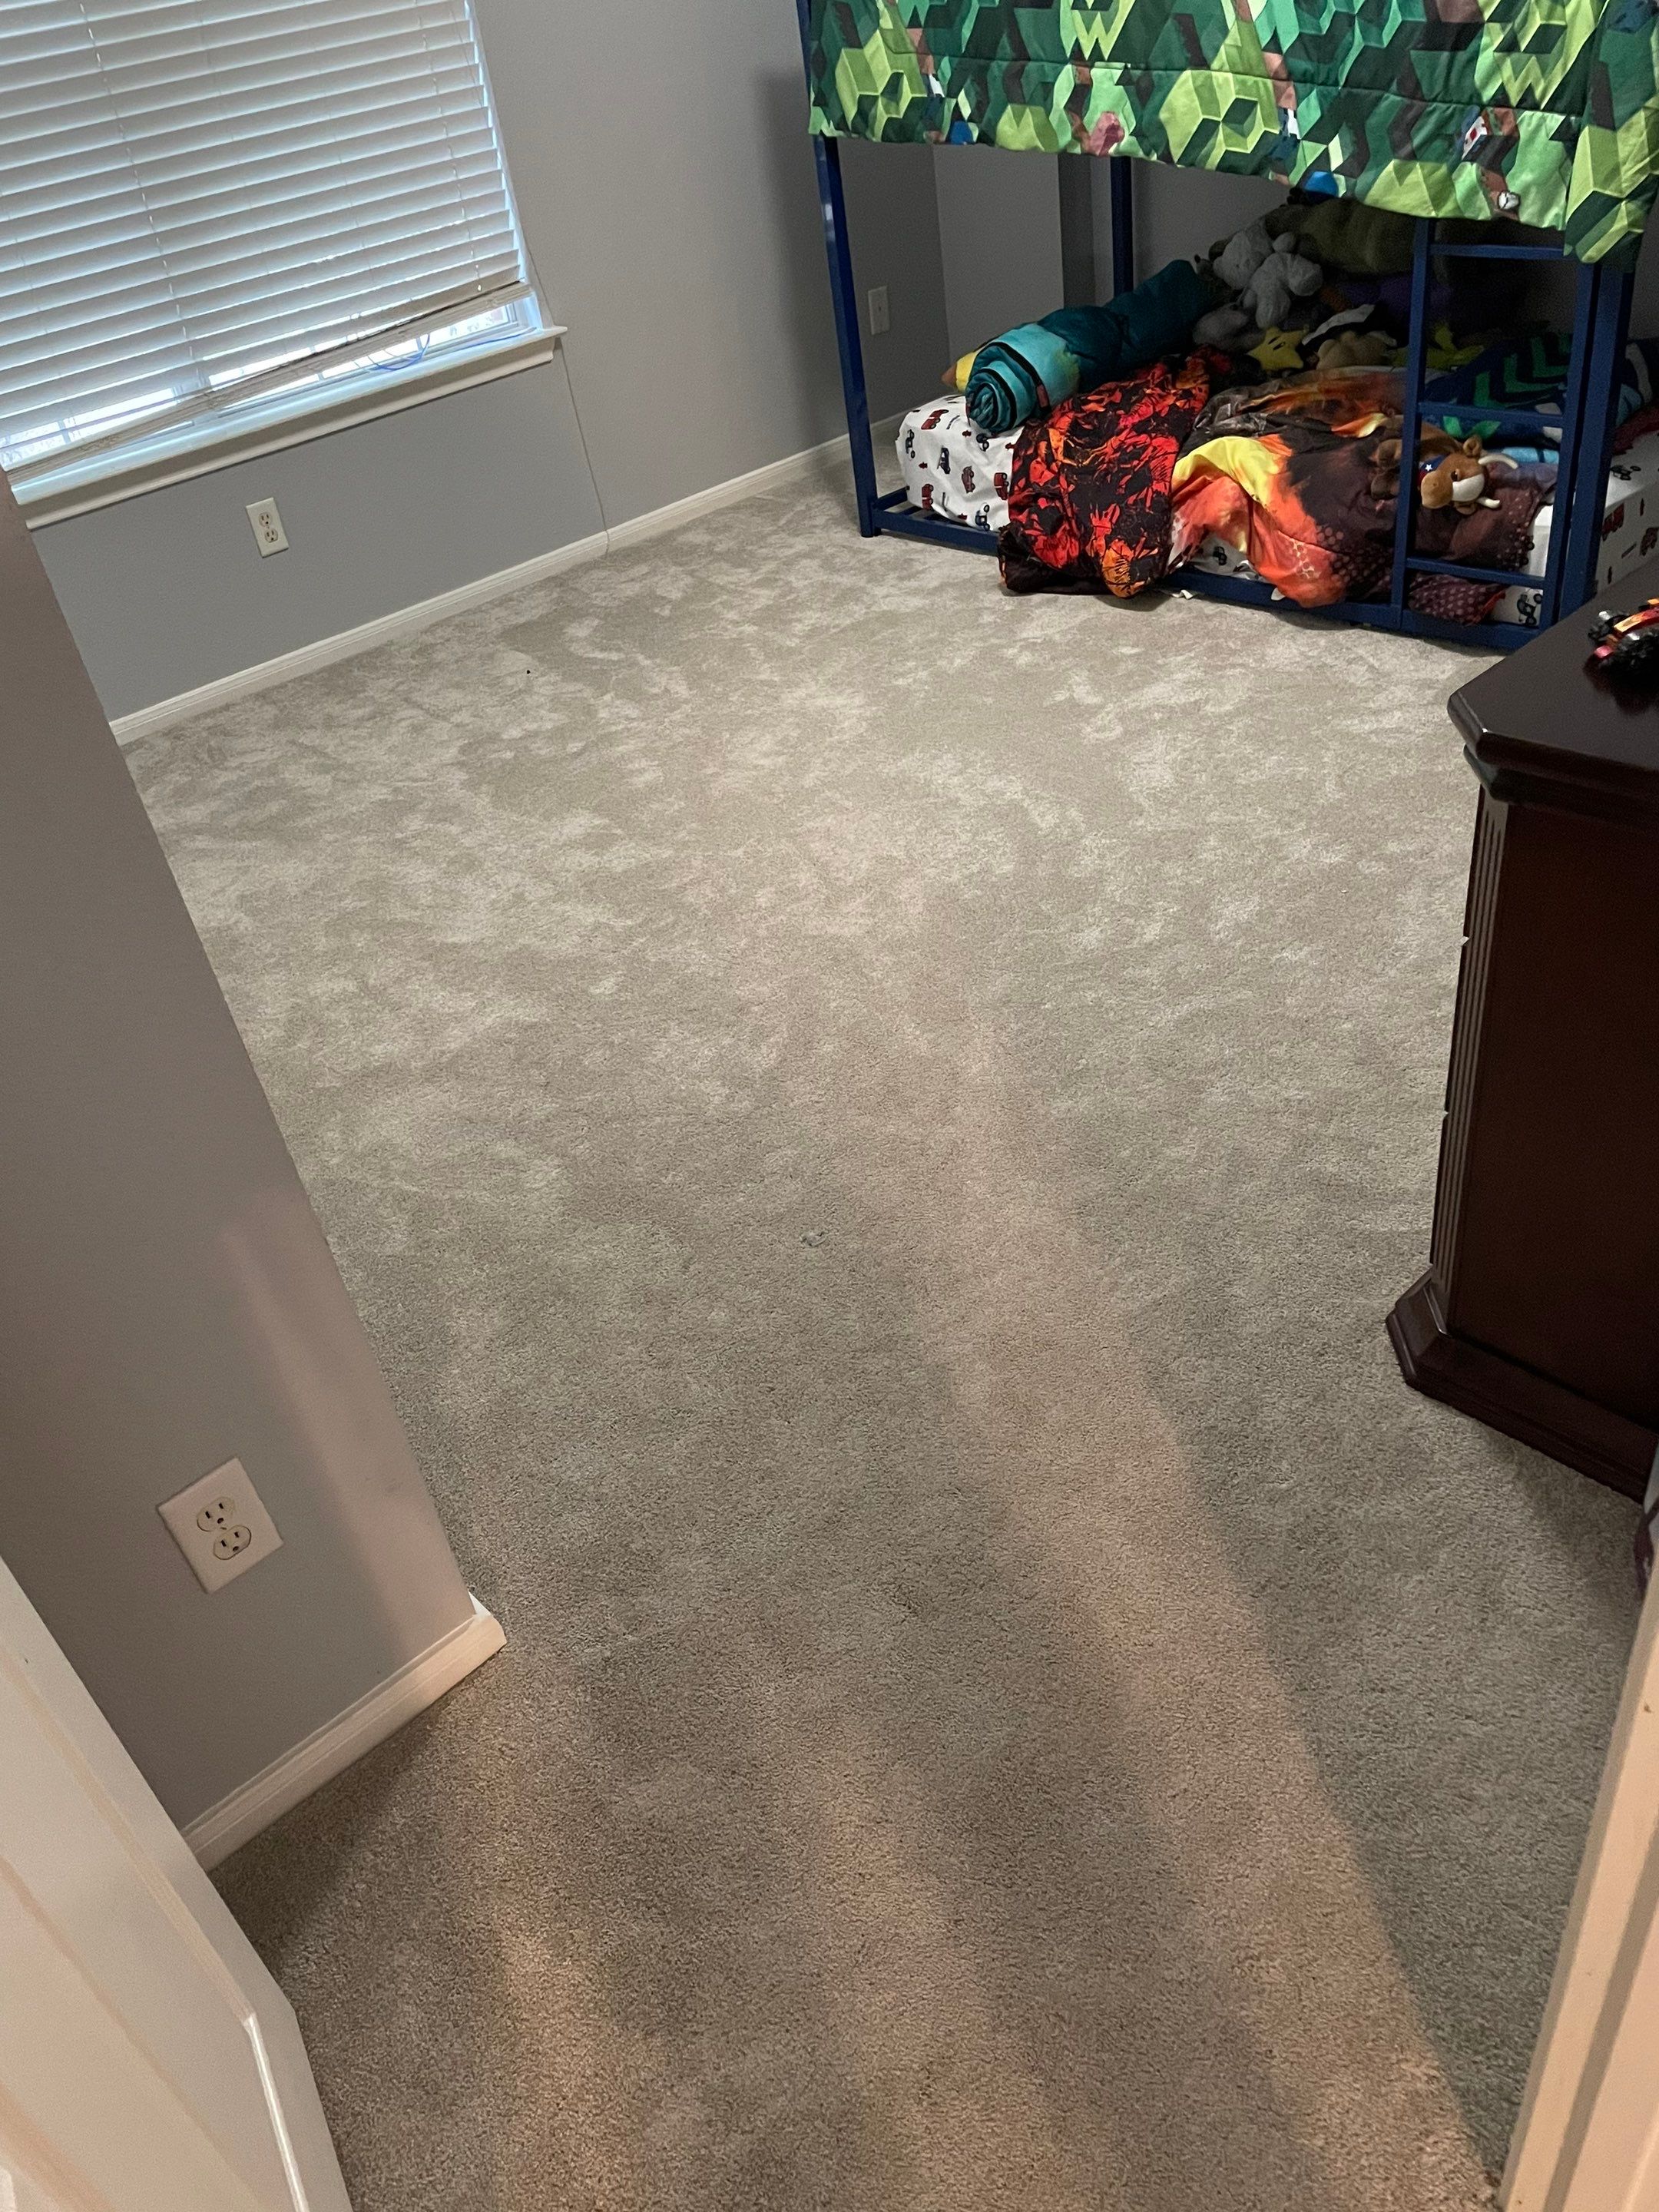 carpet cleaning to remove dirt and stains rejuvenate the appearance of the room flooring surface restoration